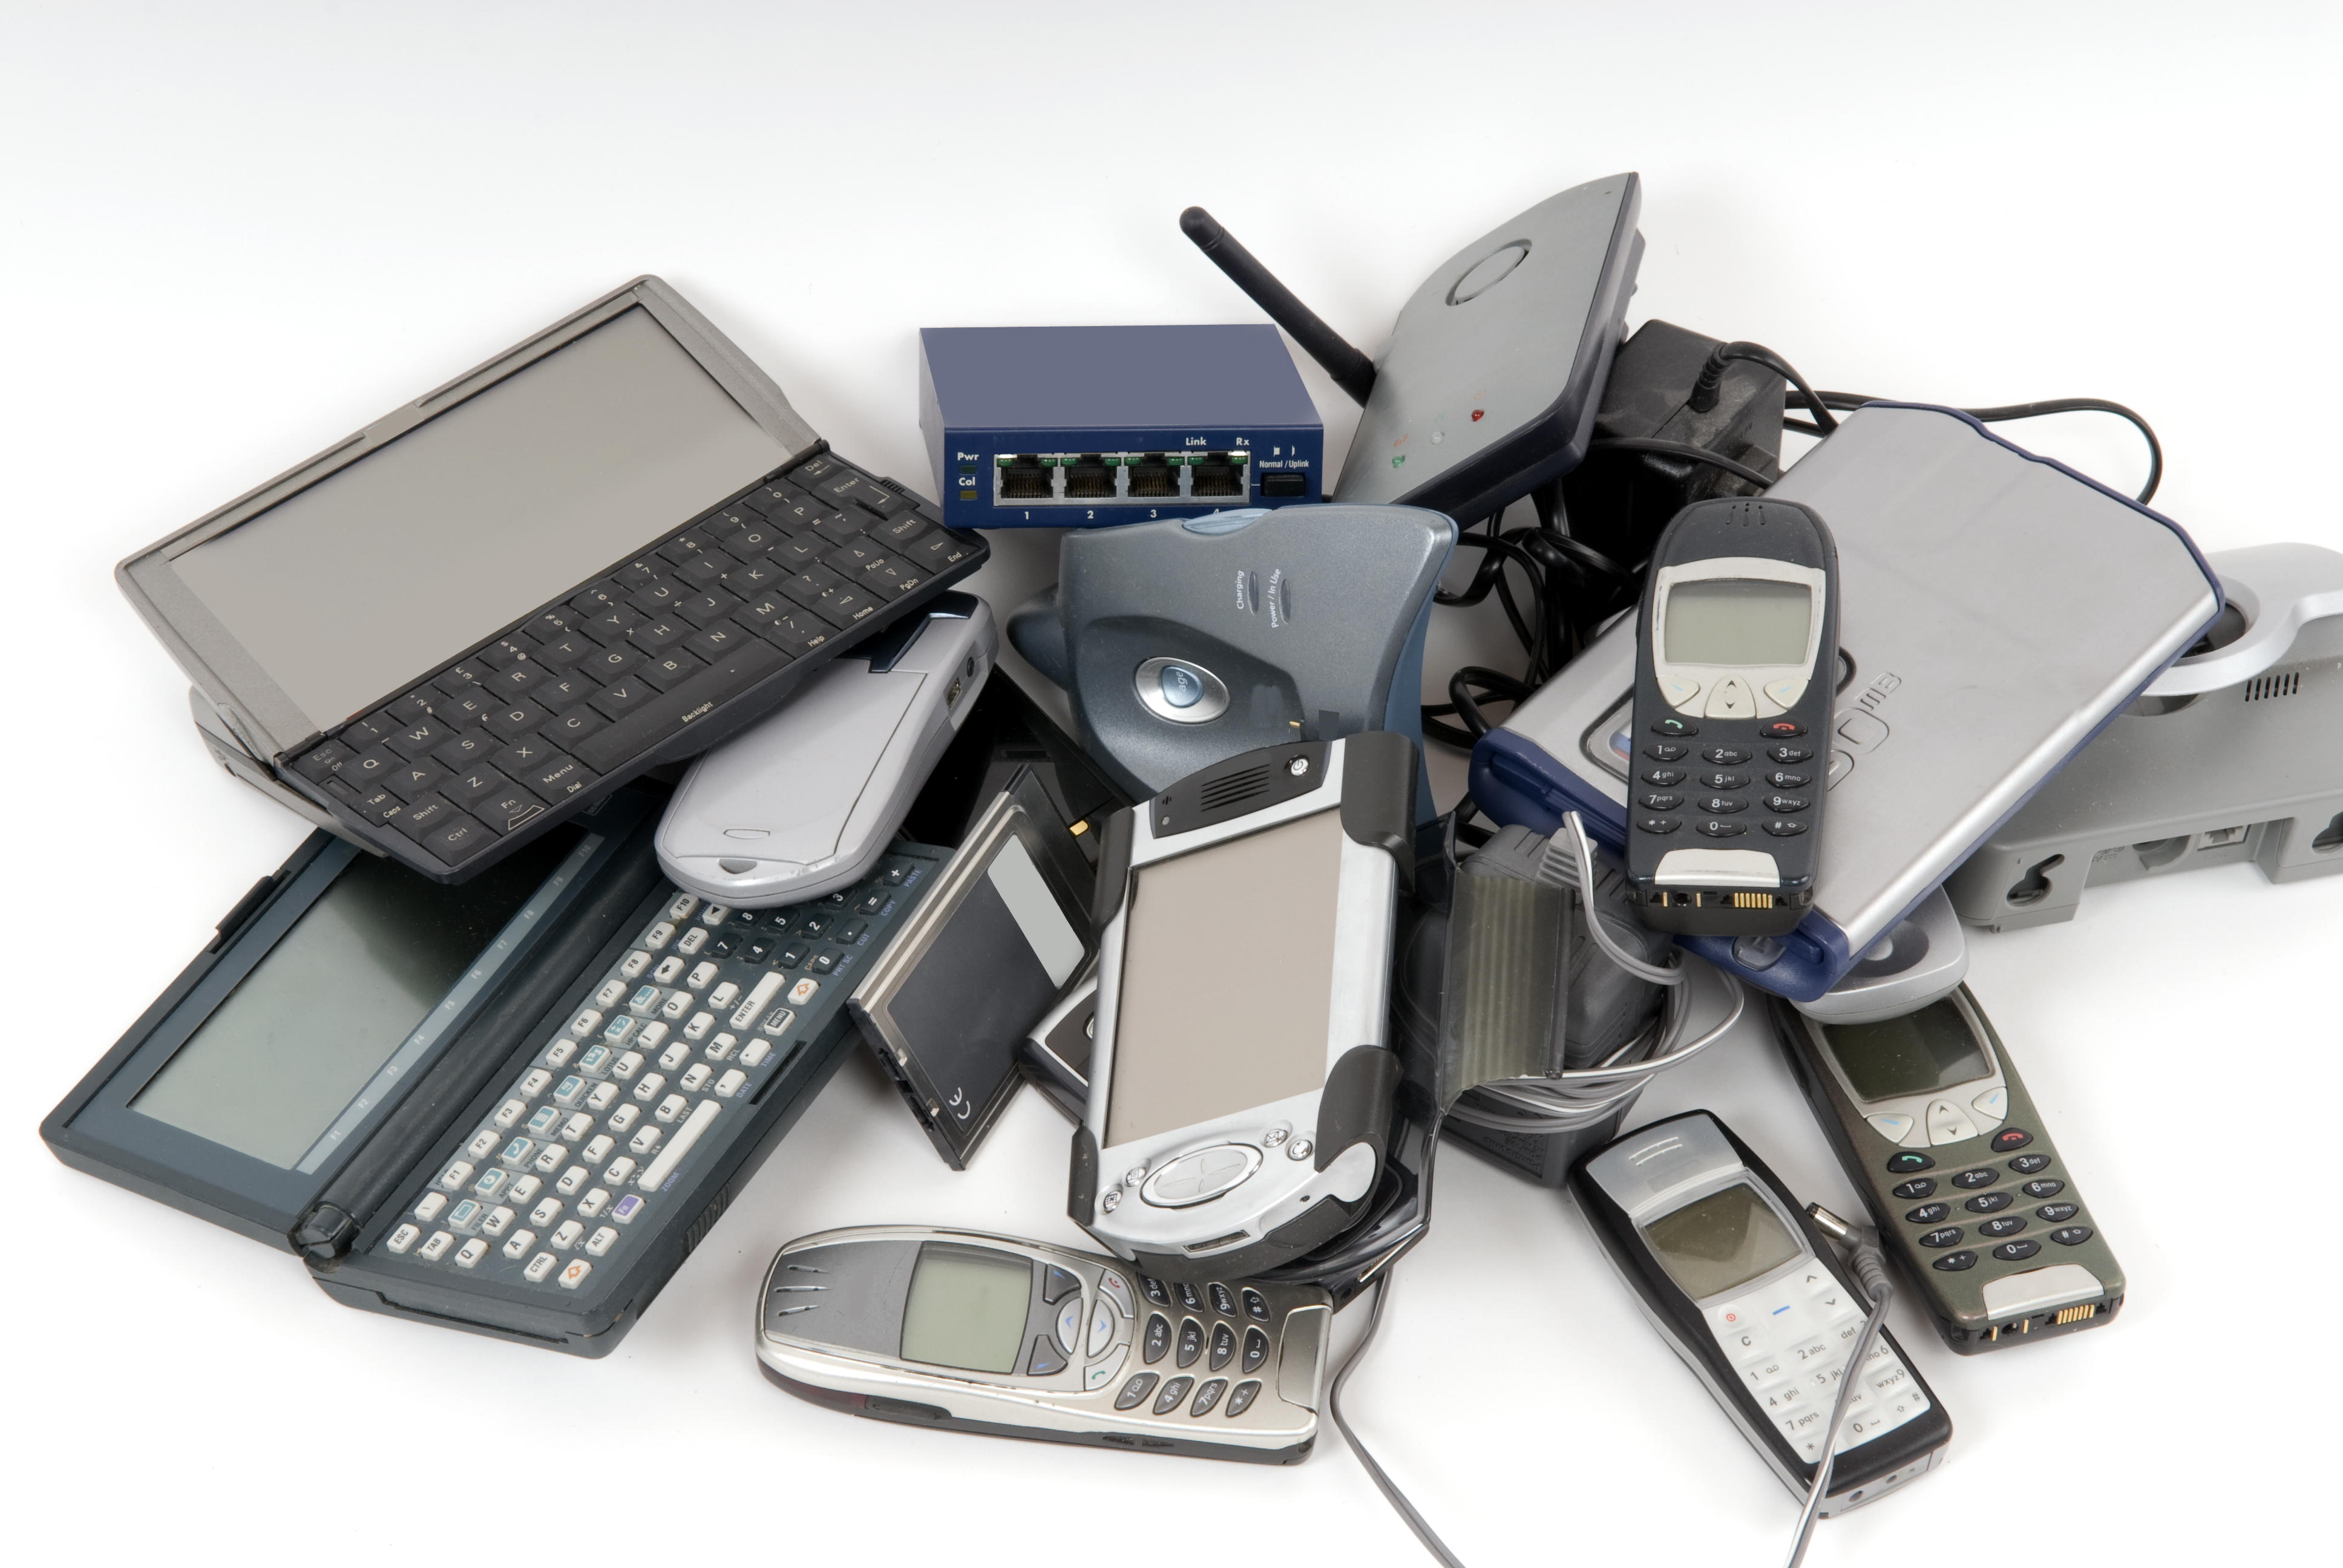 Computers, phones and other electronics in a pile